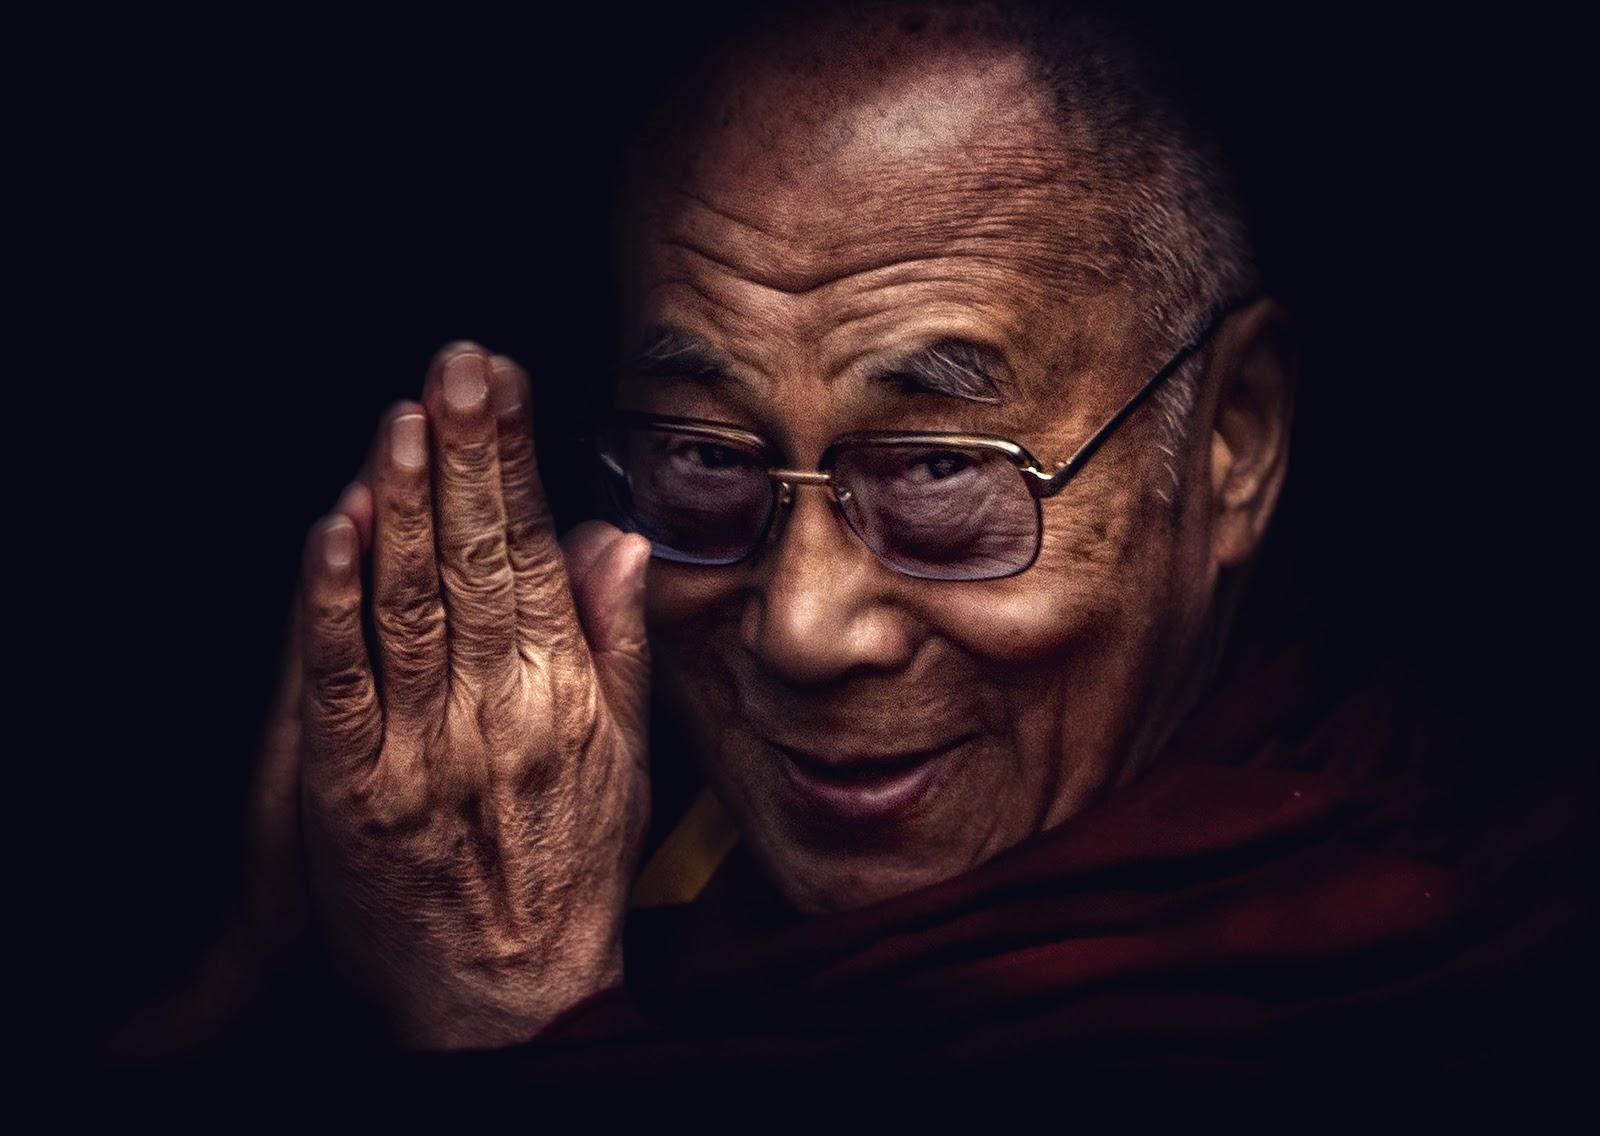 Inspirational Dalai Lama Quotes to Live by